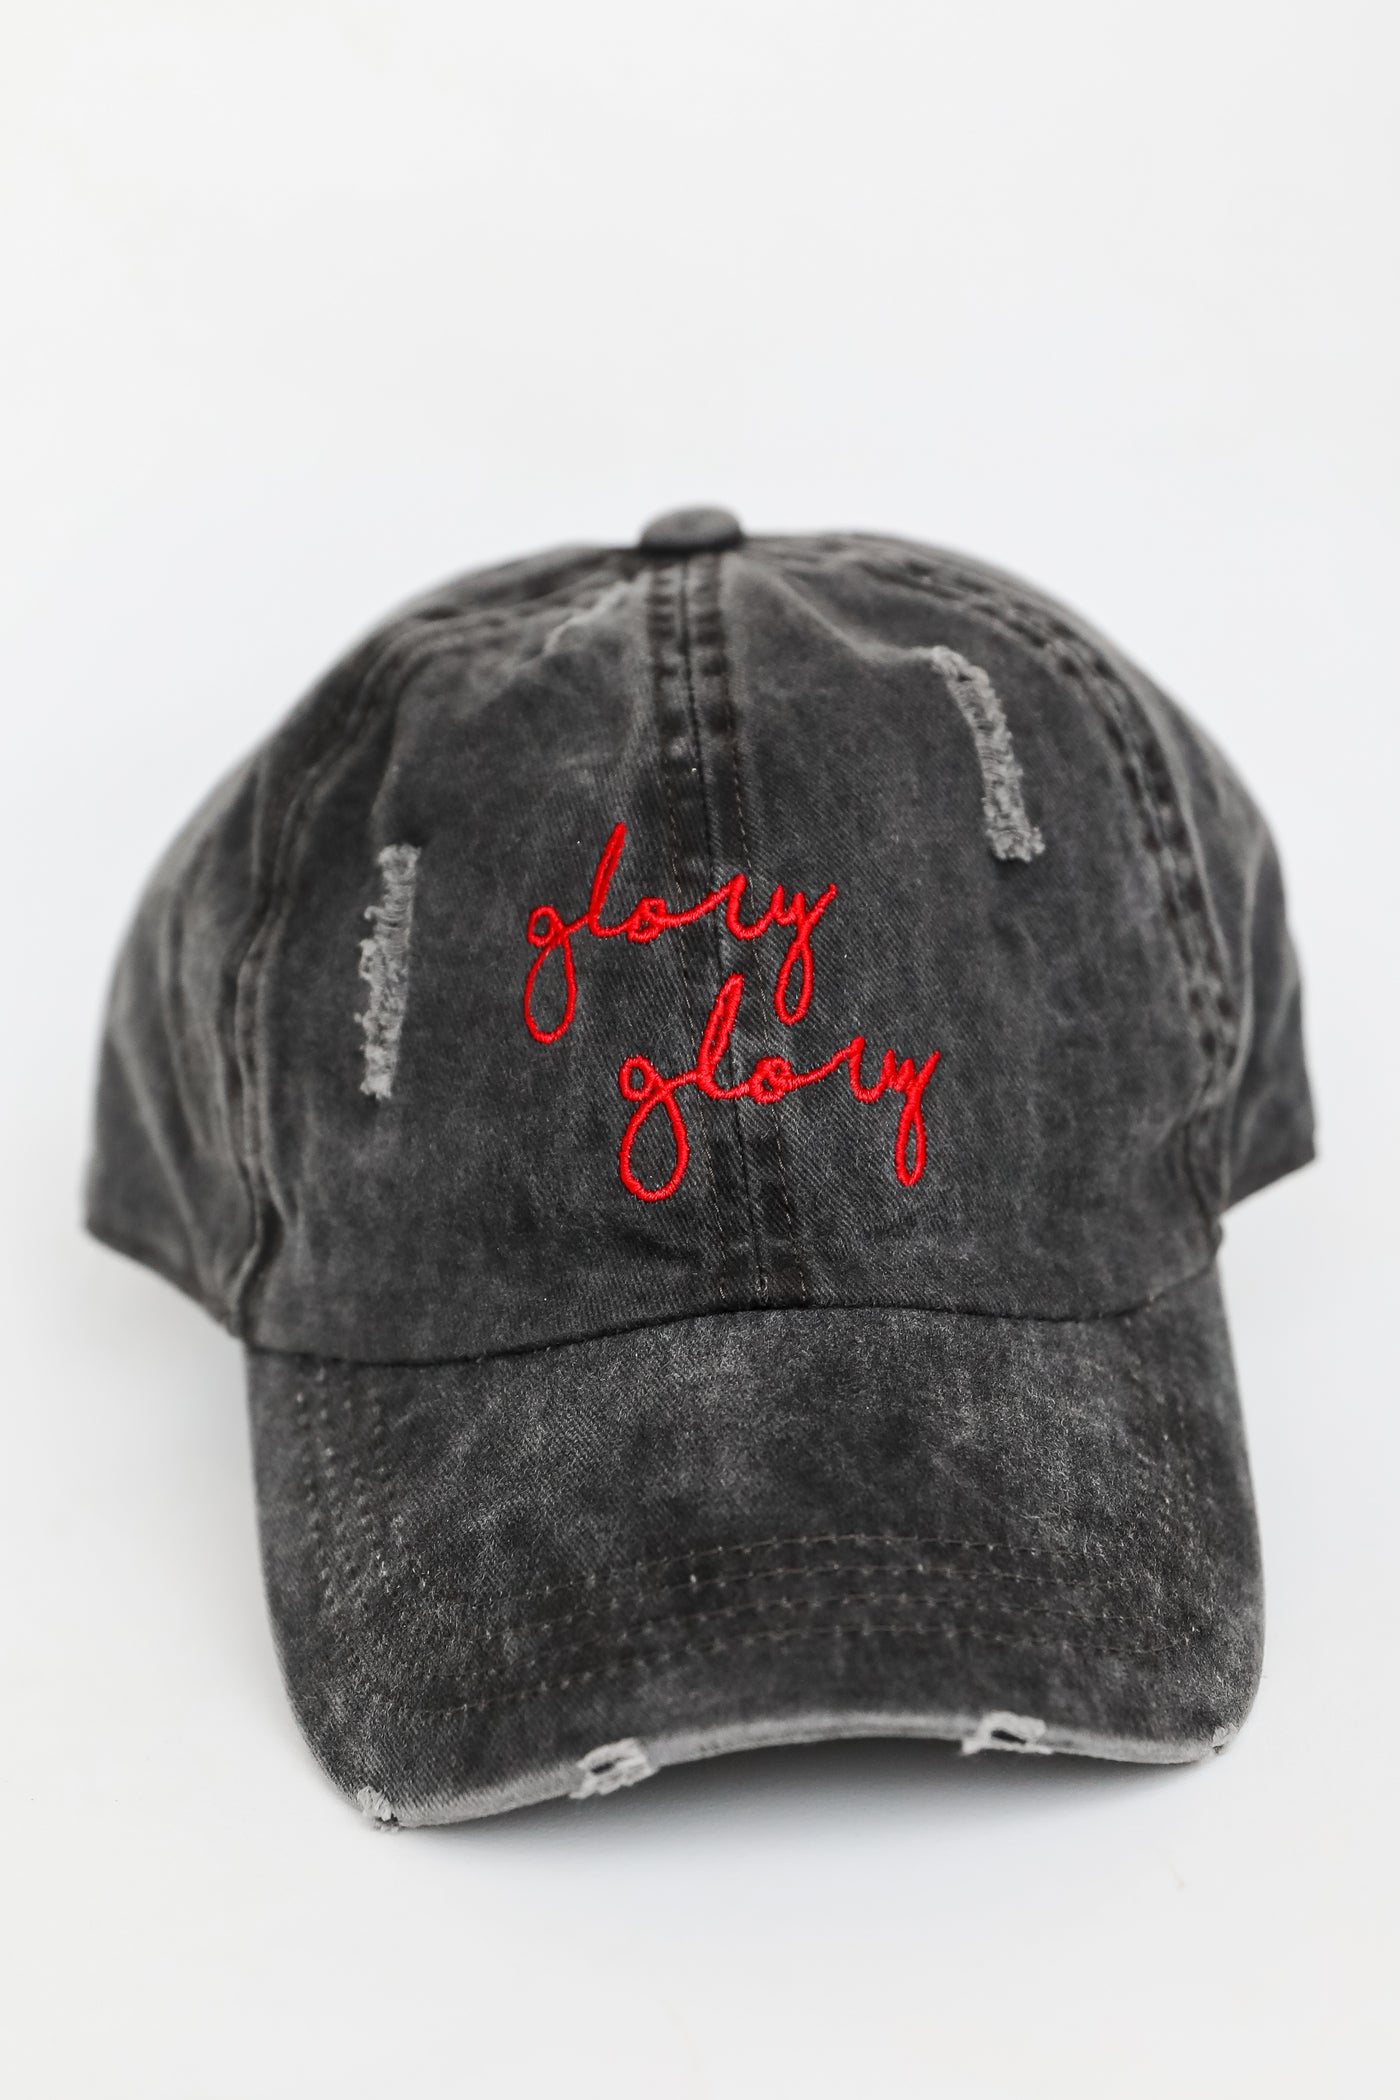 Glory Glory Script Embroidered Hat